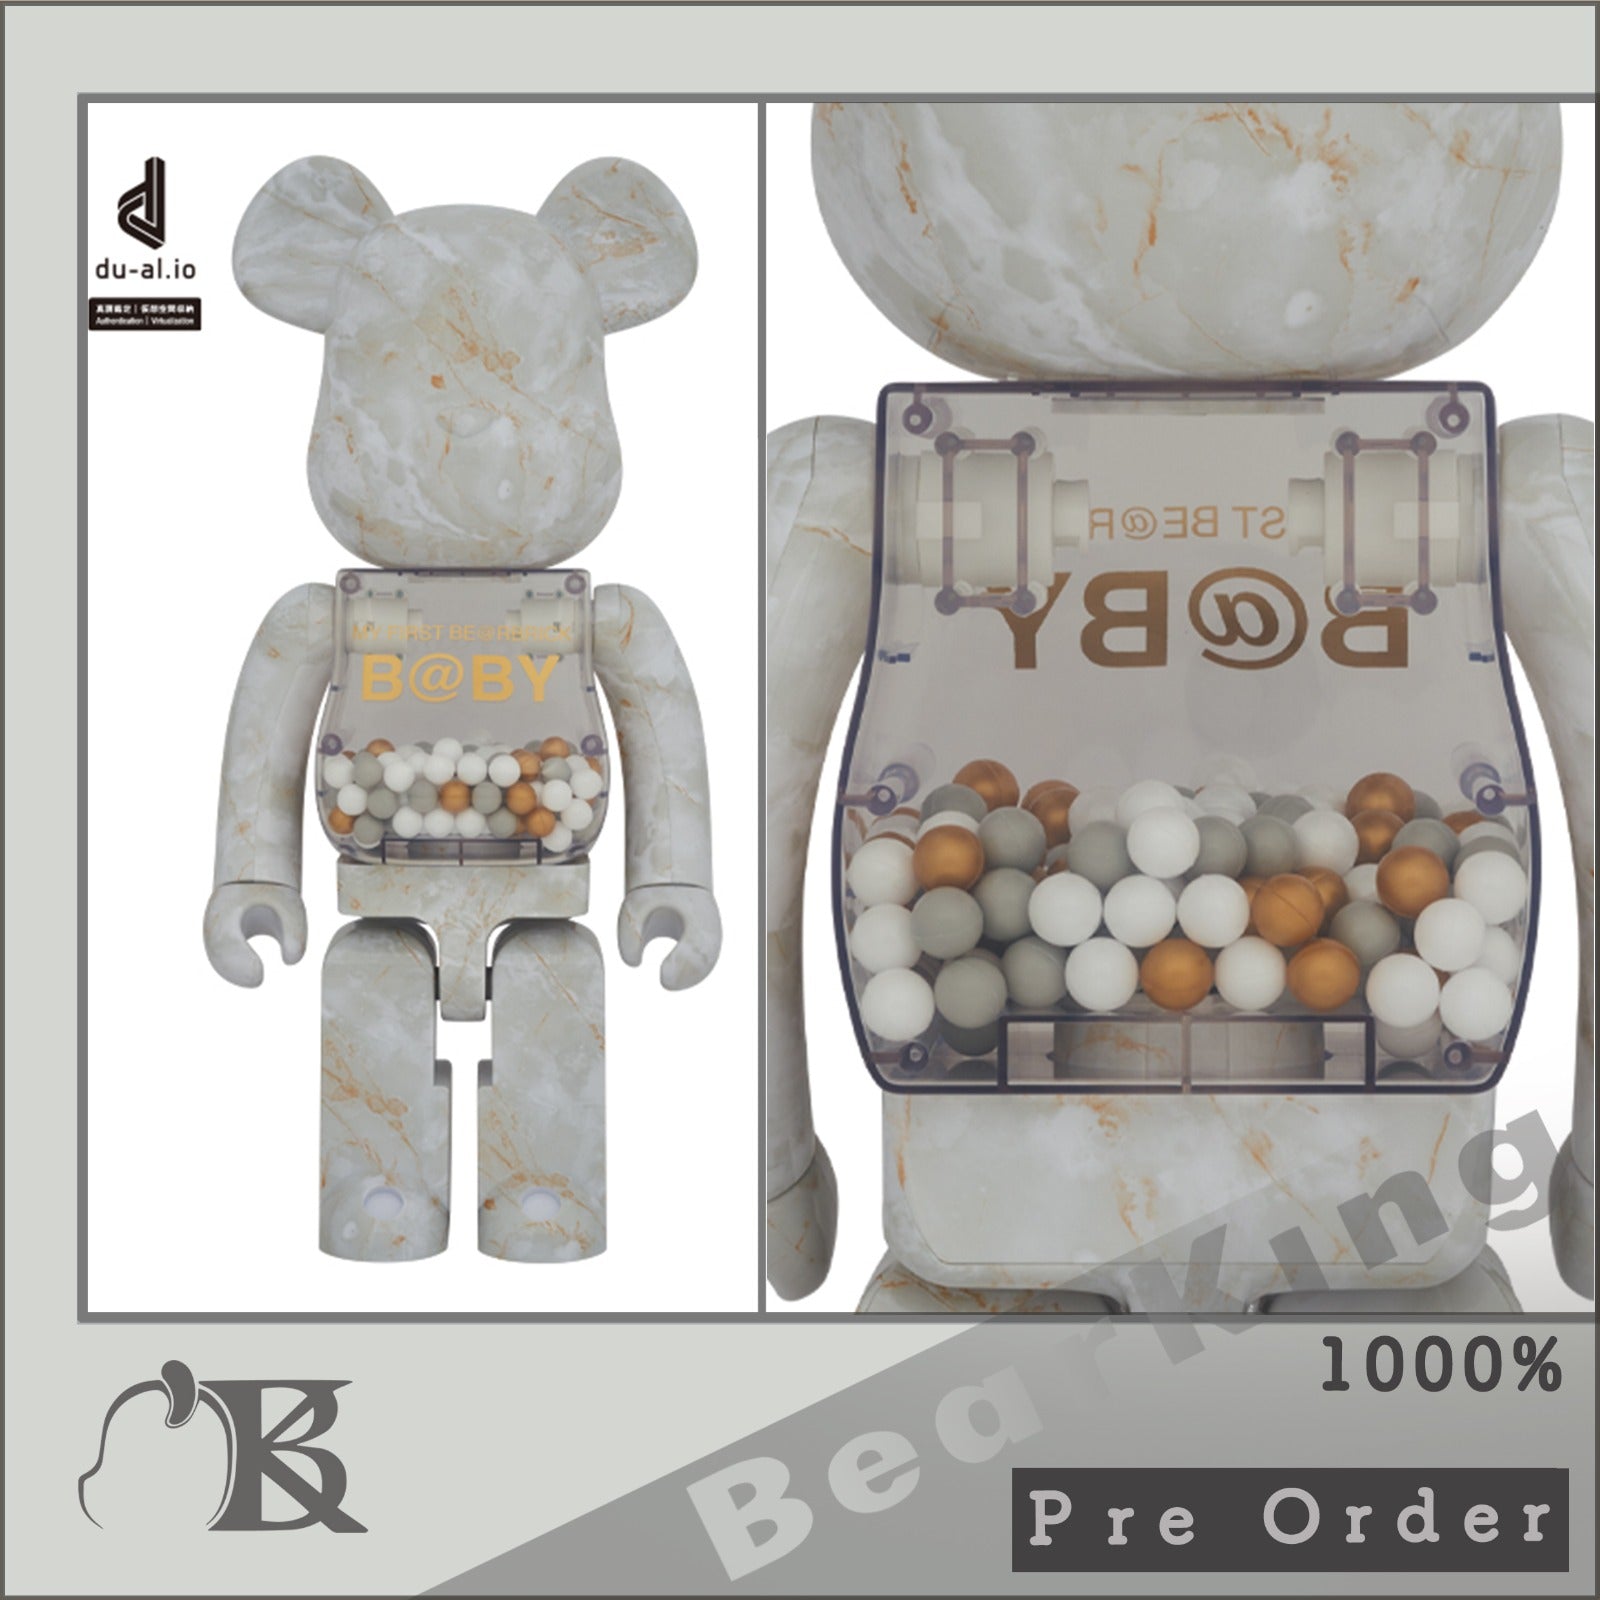 MY FIRST BE@RBRICK B@BY SPACE Ver.1000％ 千秋Baby 星空